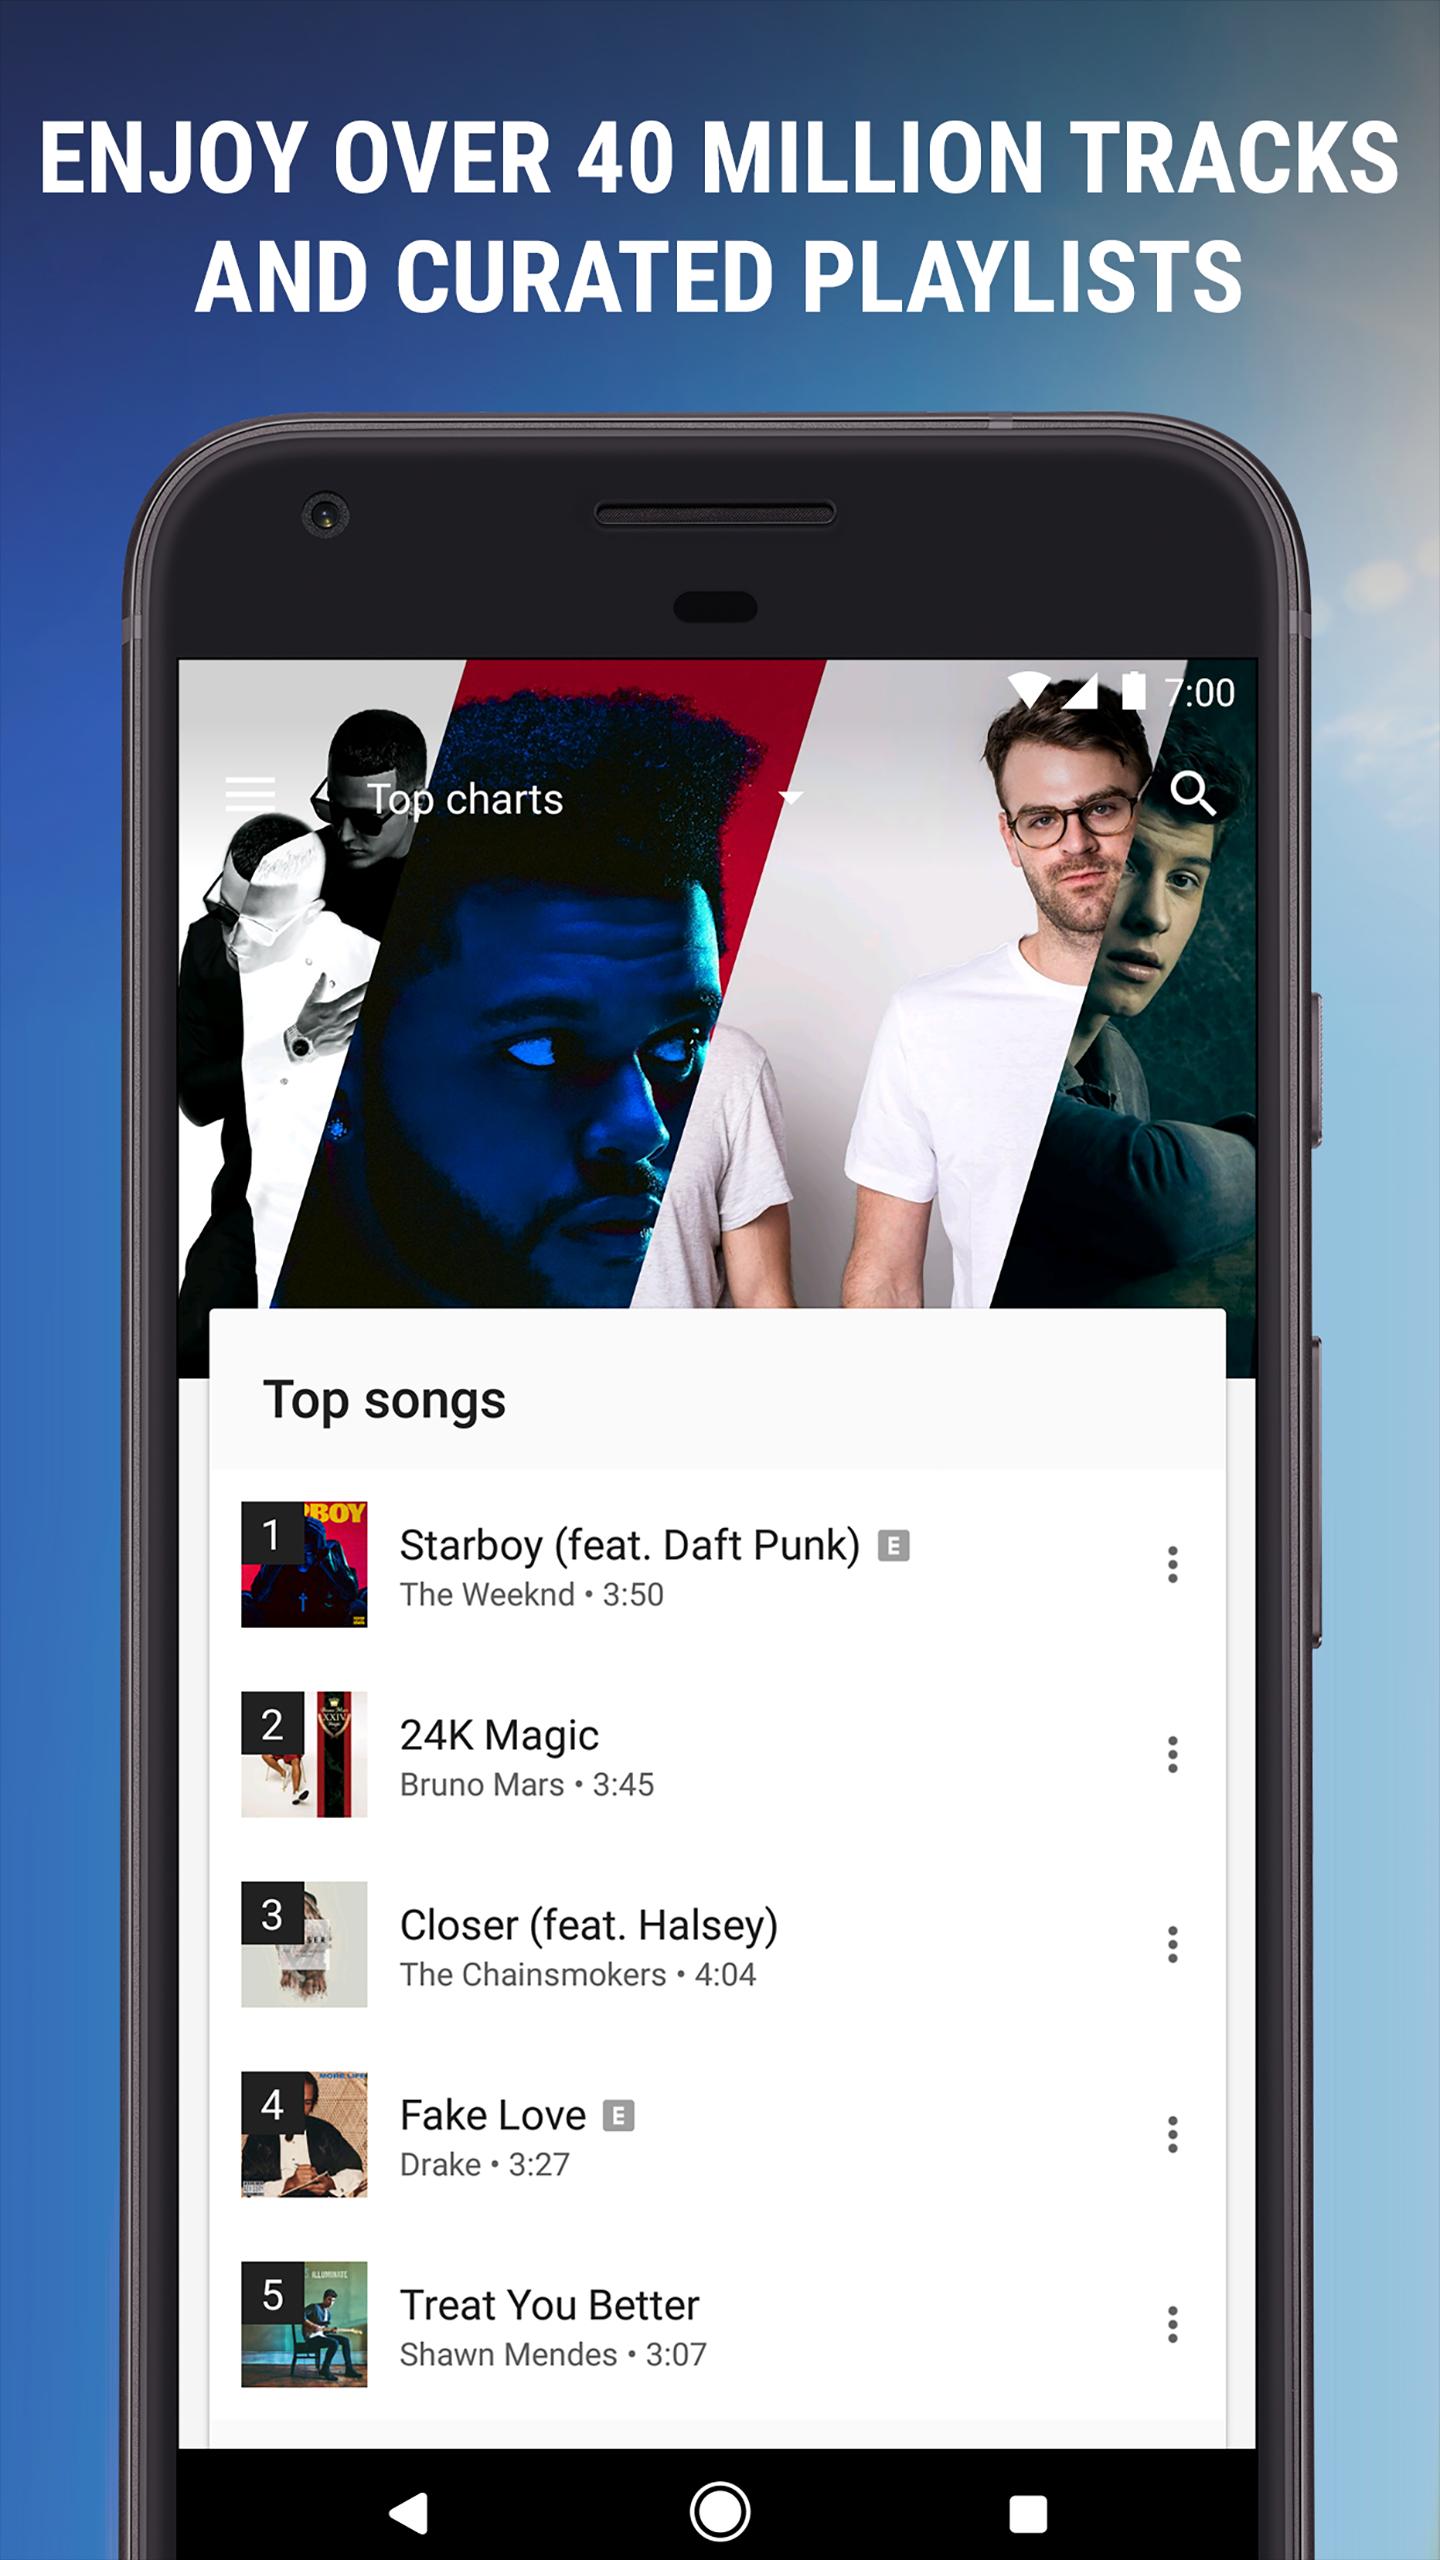 Google Play Music For Android Apk Download